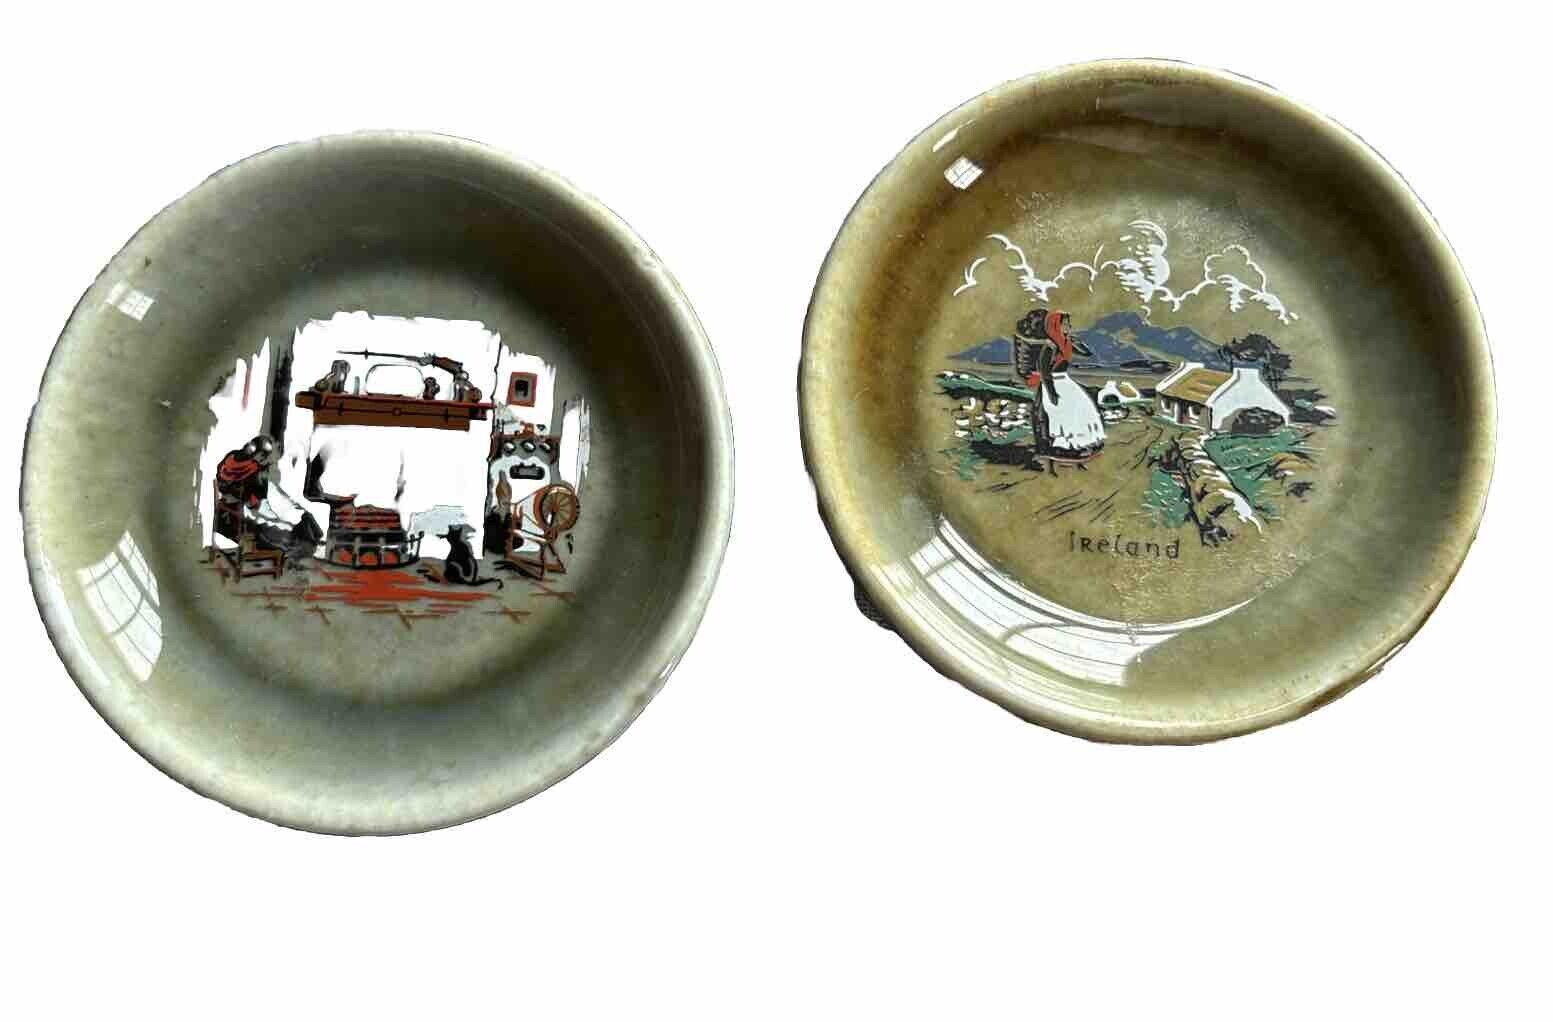 Irish Wade Butter Dishes. Very good condition  from 1950’s. Scenes from Ireland